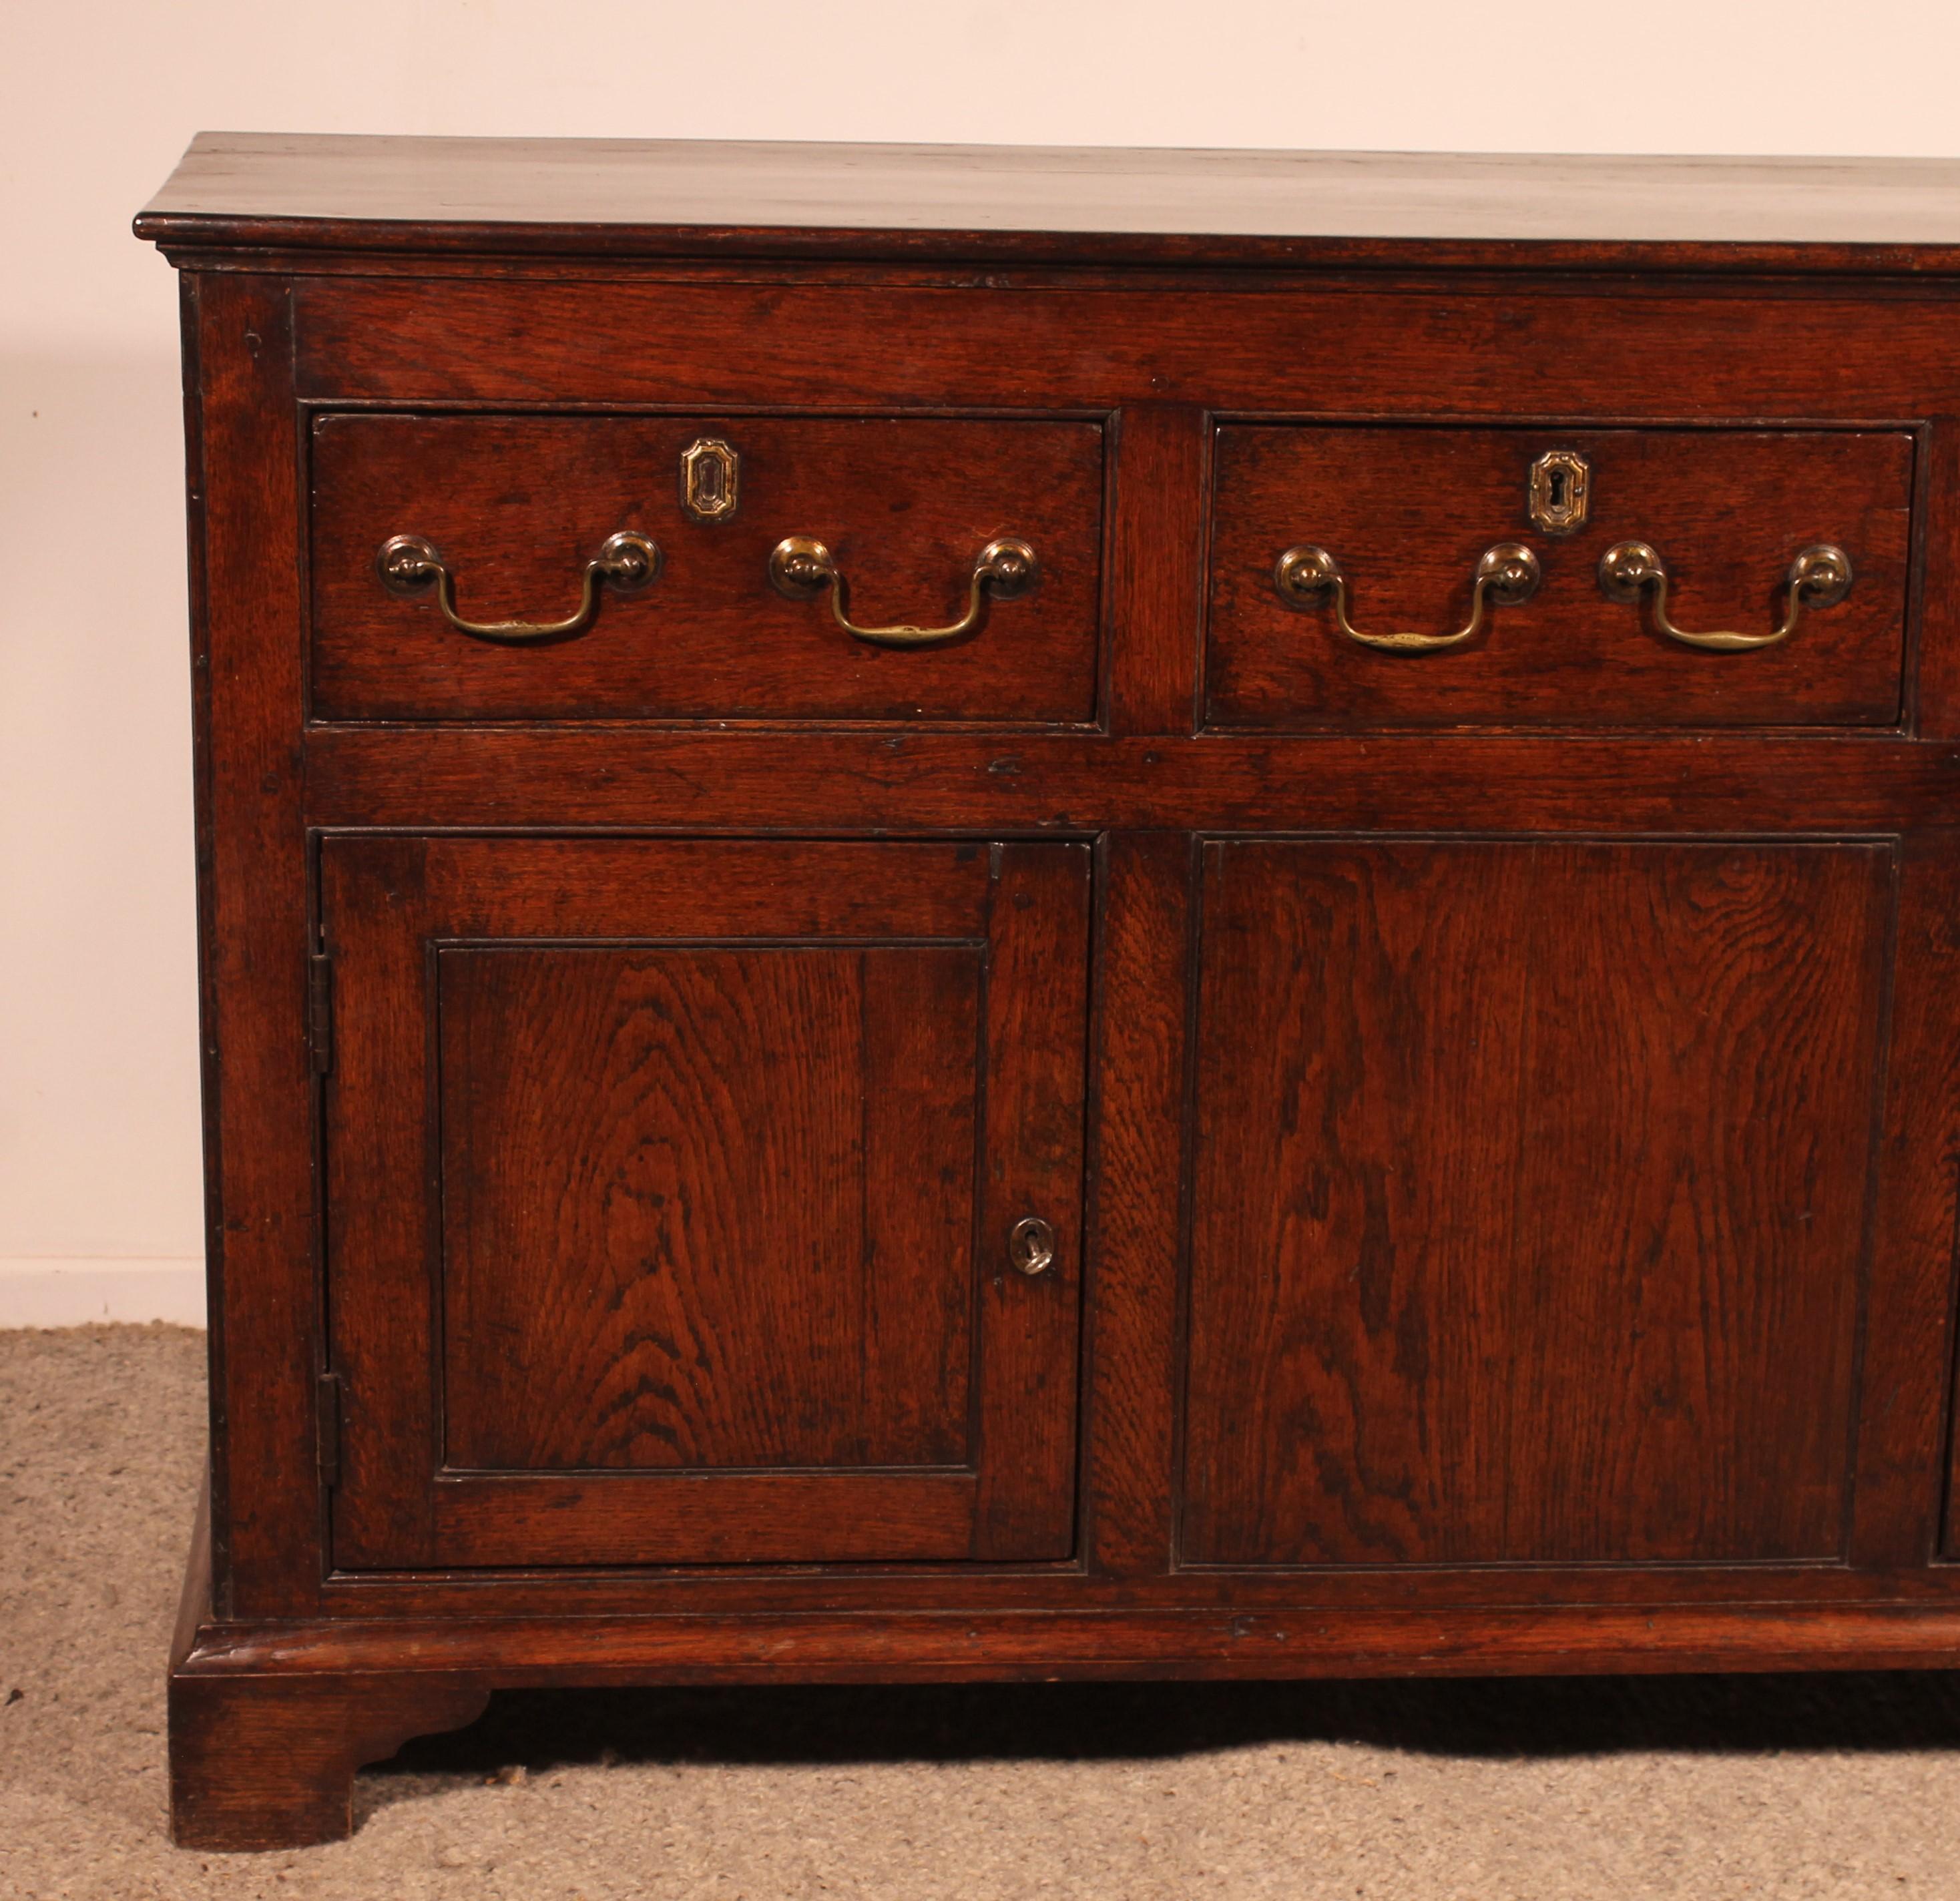 lovely dresser base with 2 doors and three drawers from the 18th century in oak
Very elegant sideboard of small proportions which opens with two leaves with very pure lines typical of 18th century English furniture

Very beautiful top with a